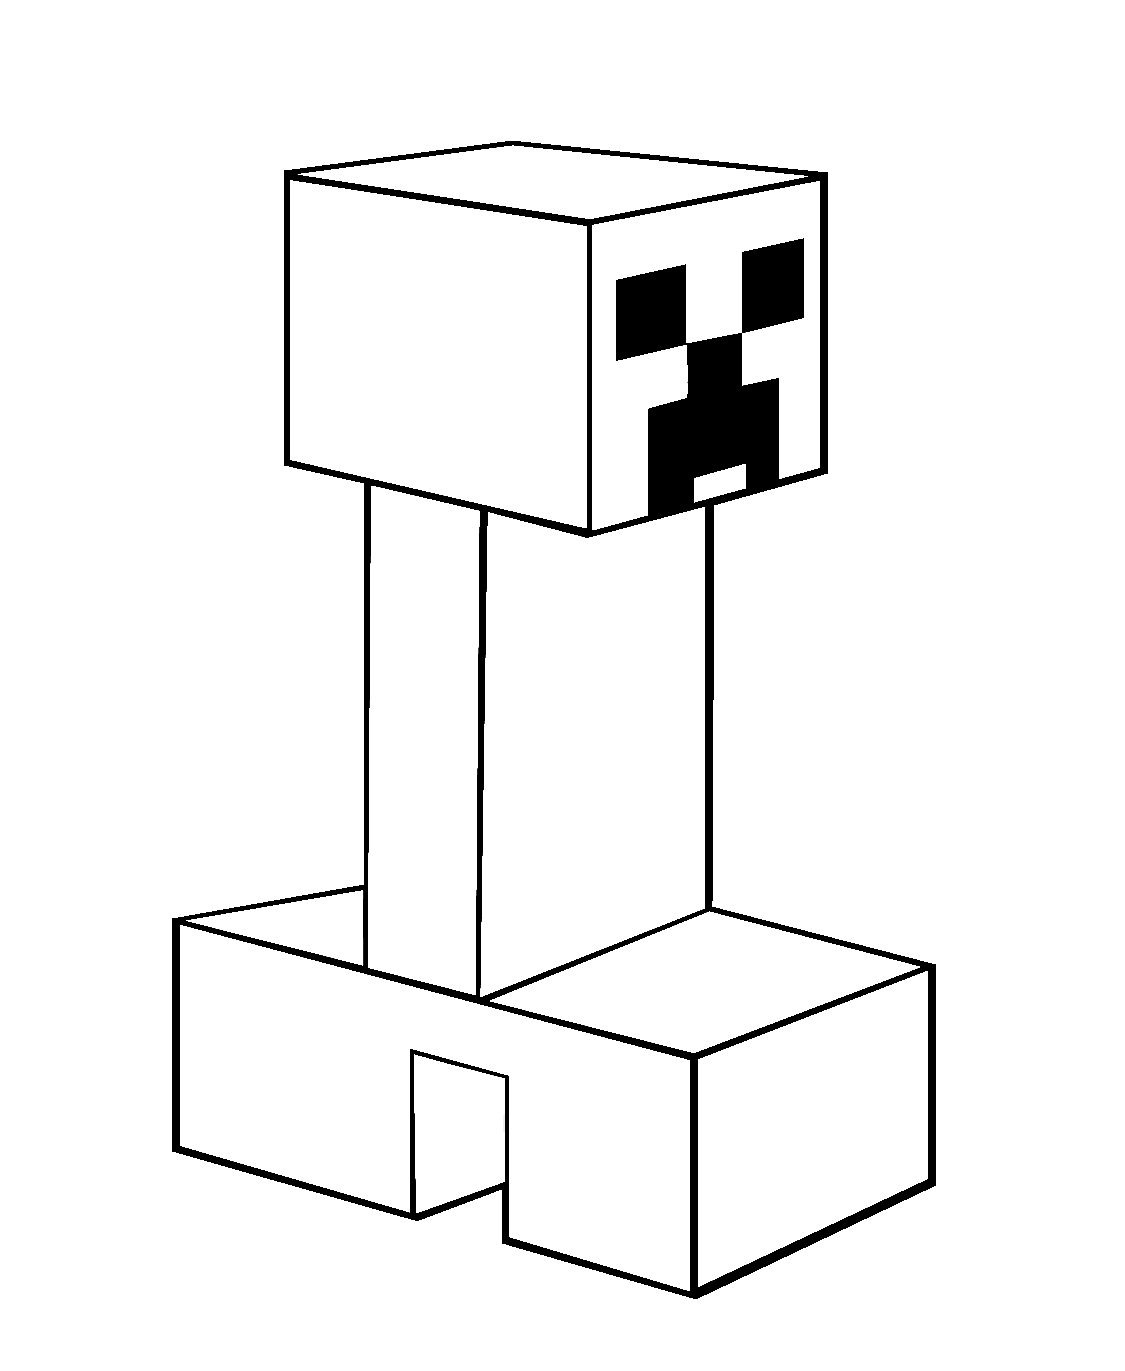 Minecraft Coloring pages | Printable Coloring Pages